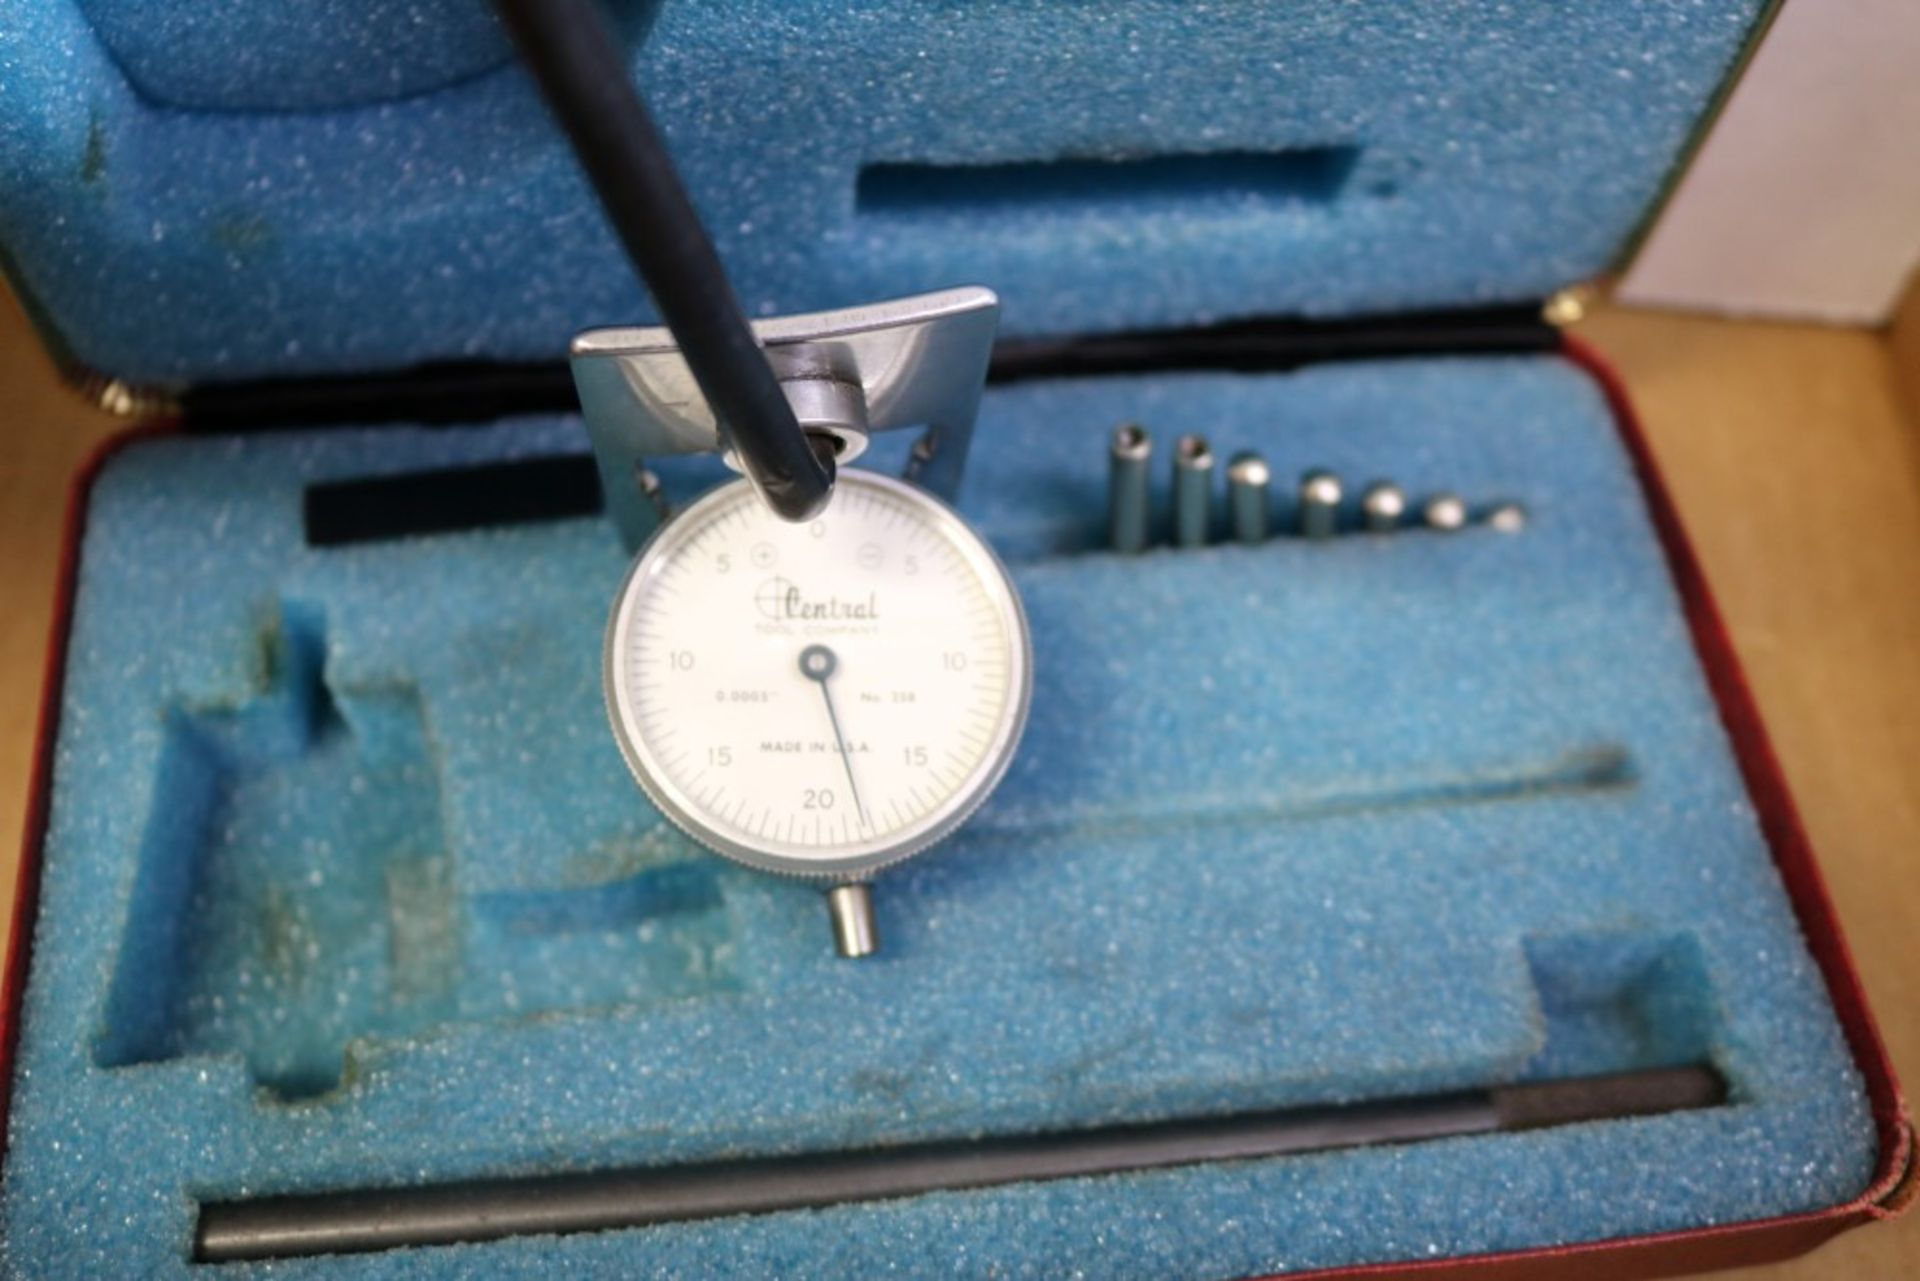 Central Tool Company Dial Bore Indicator with Attachments and Fowler .7" - 1.5" Dial Bore Indicator - Image 8 of 10